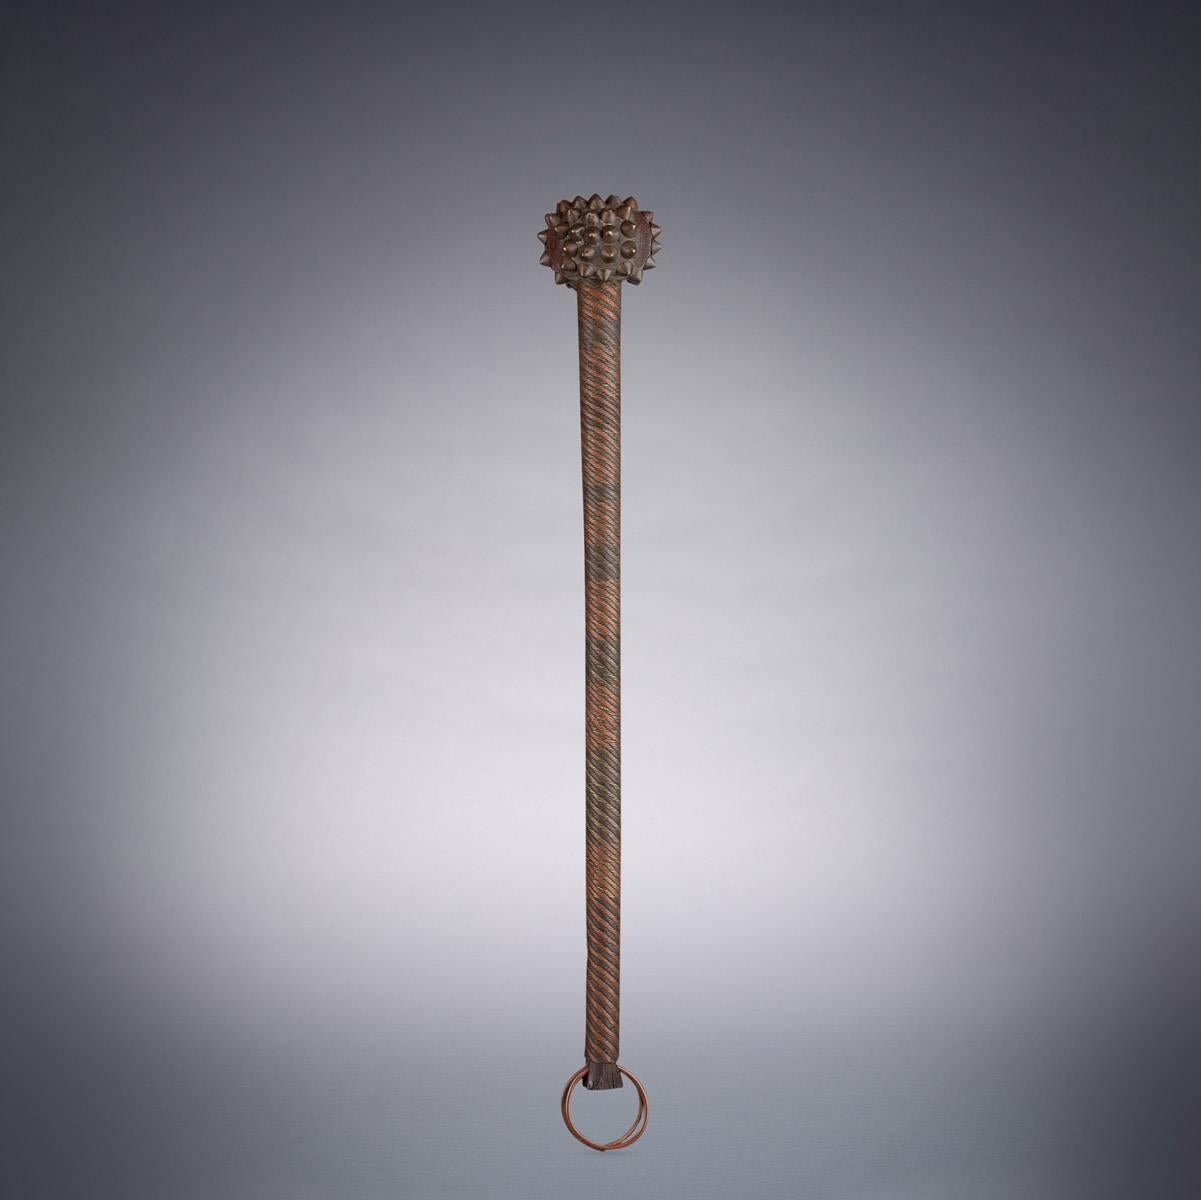 A South African knobkerrie designed to project power and intimidate enemies. This impressive piece features a shaft intricately decorated with brass and copper wirework and a spherical head adorned with brass studs. Condition is good, though a few